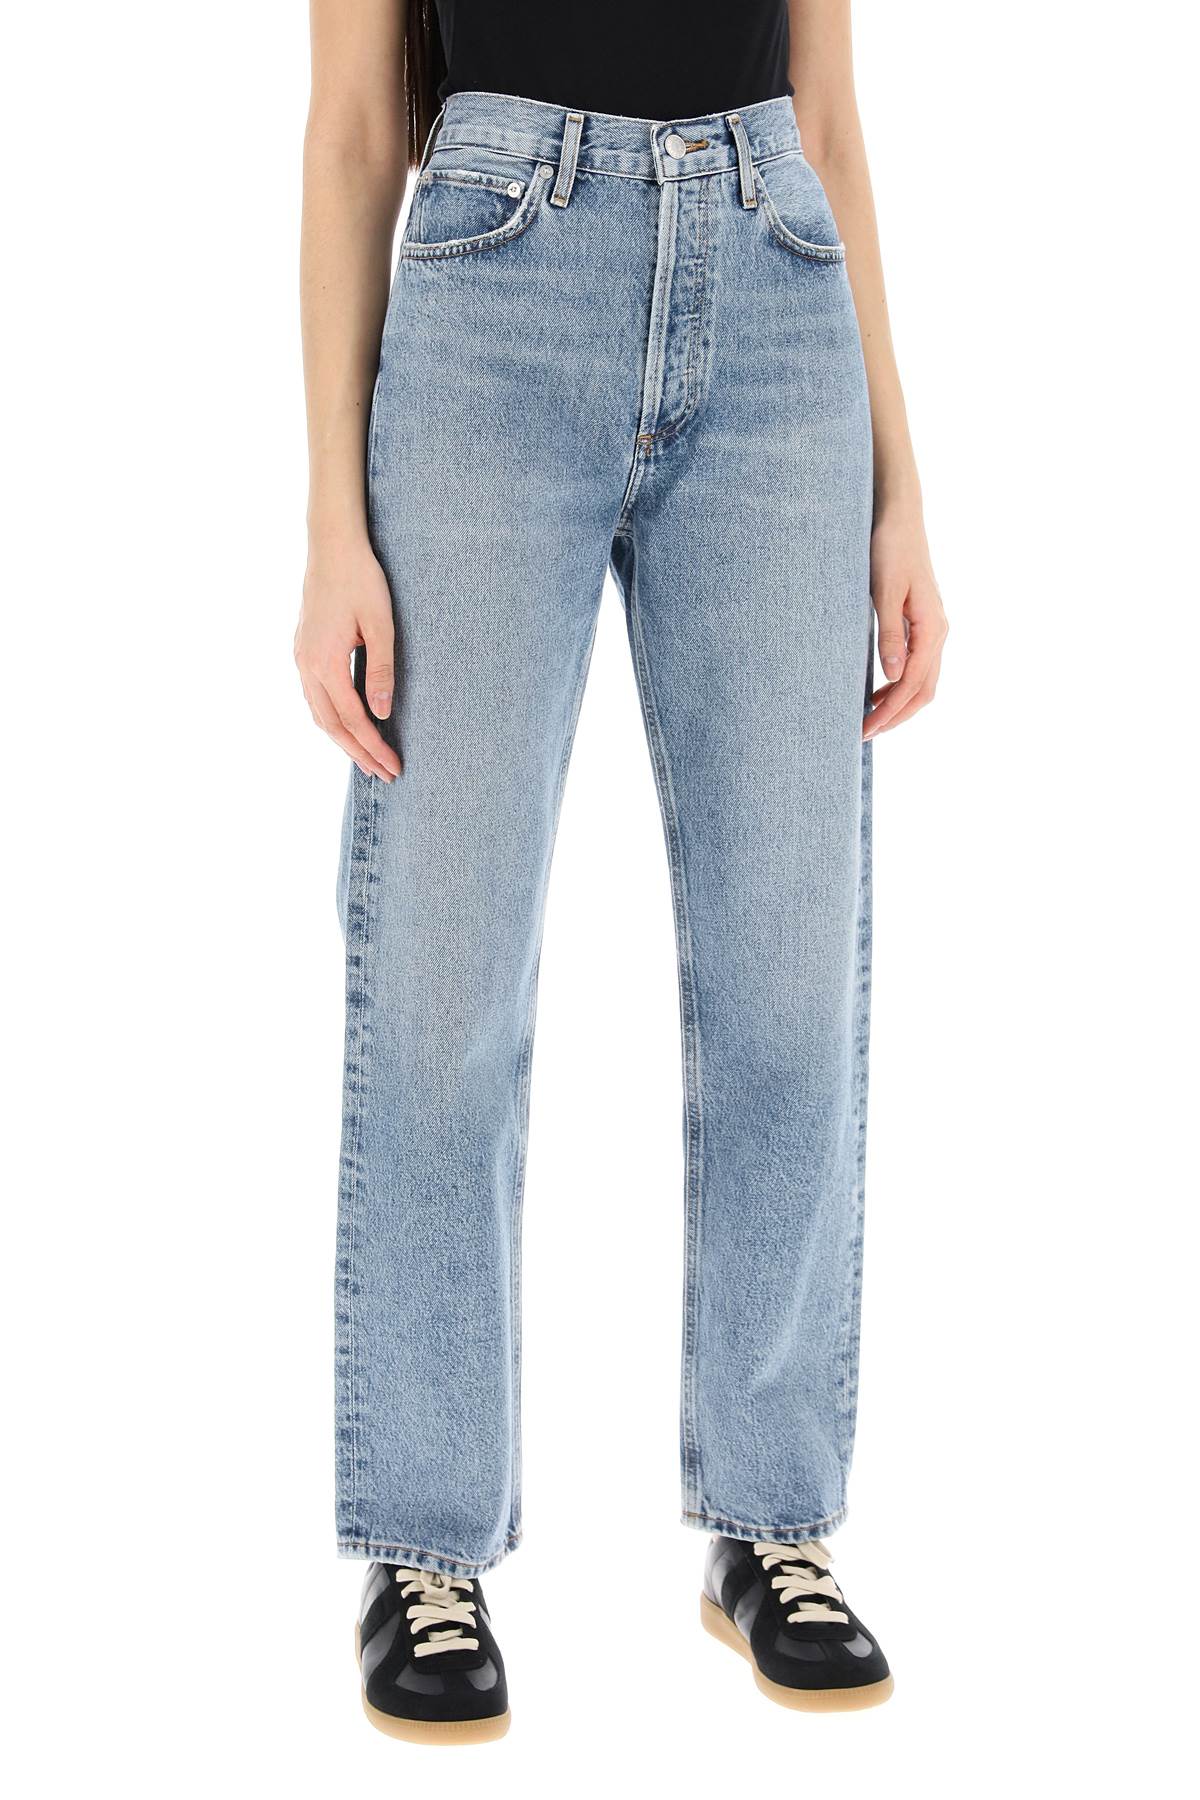 Agolde straight leg jeans from the 90's with high waist-1